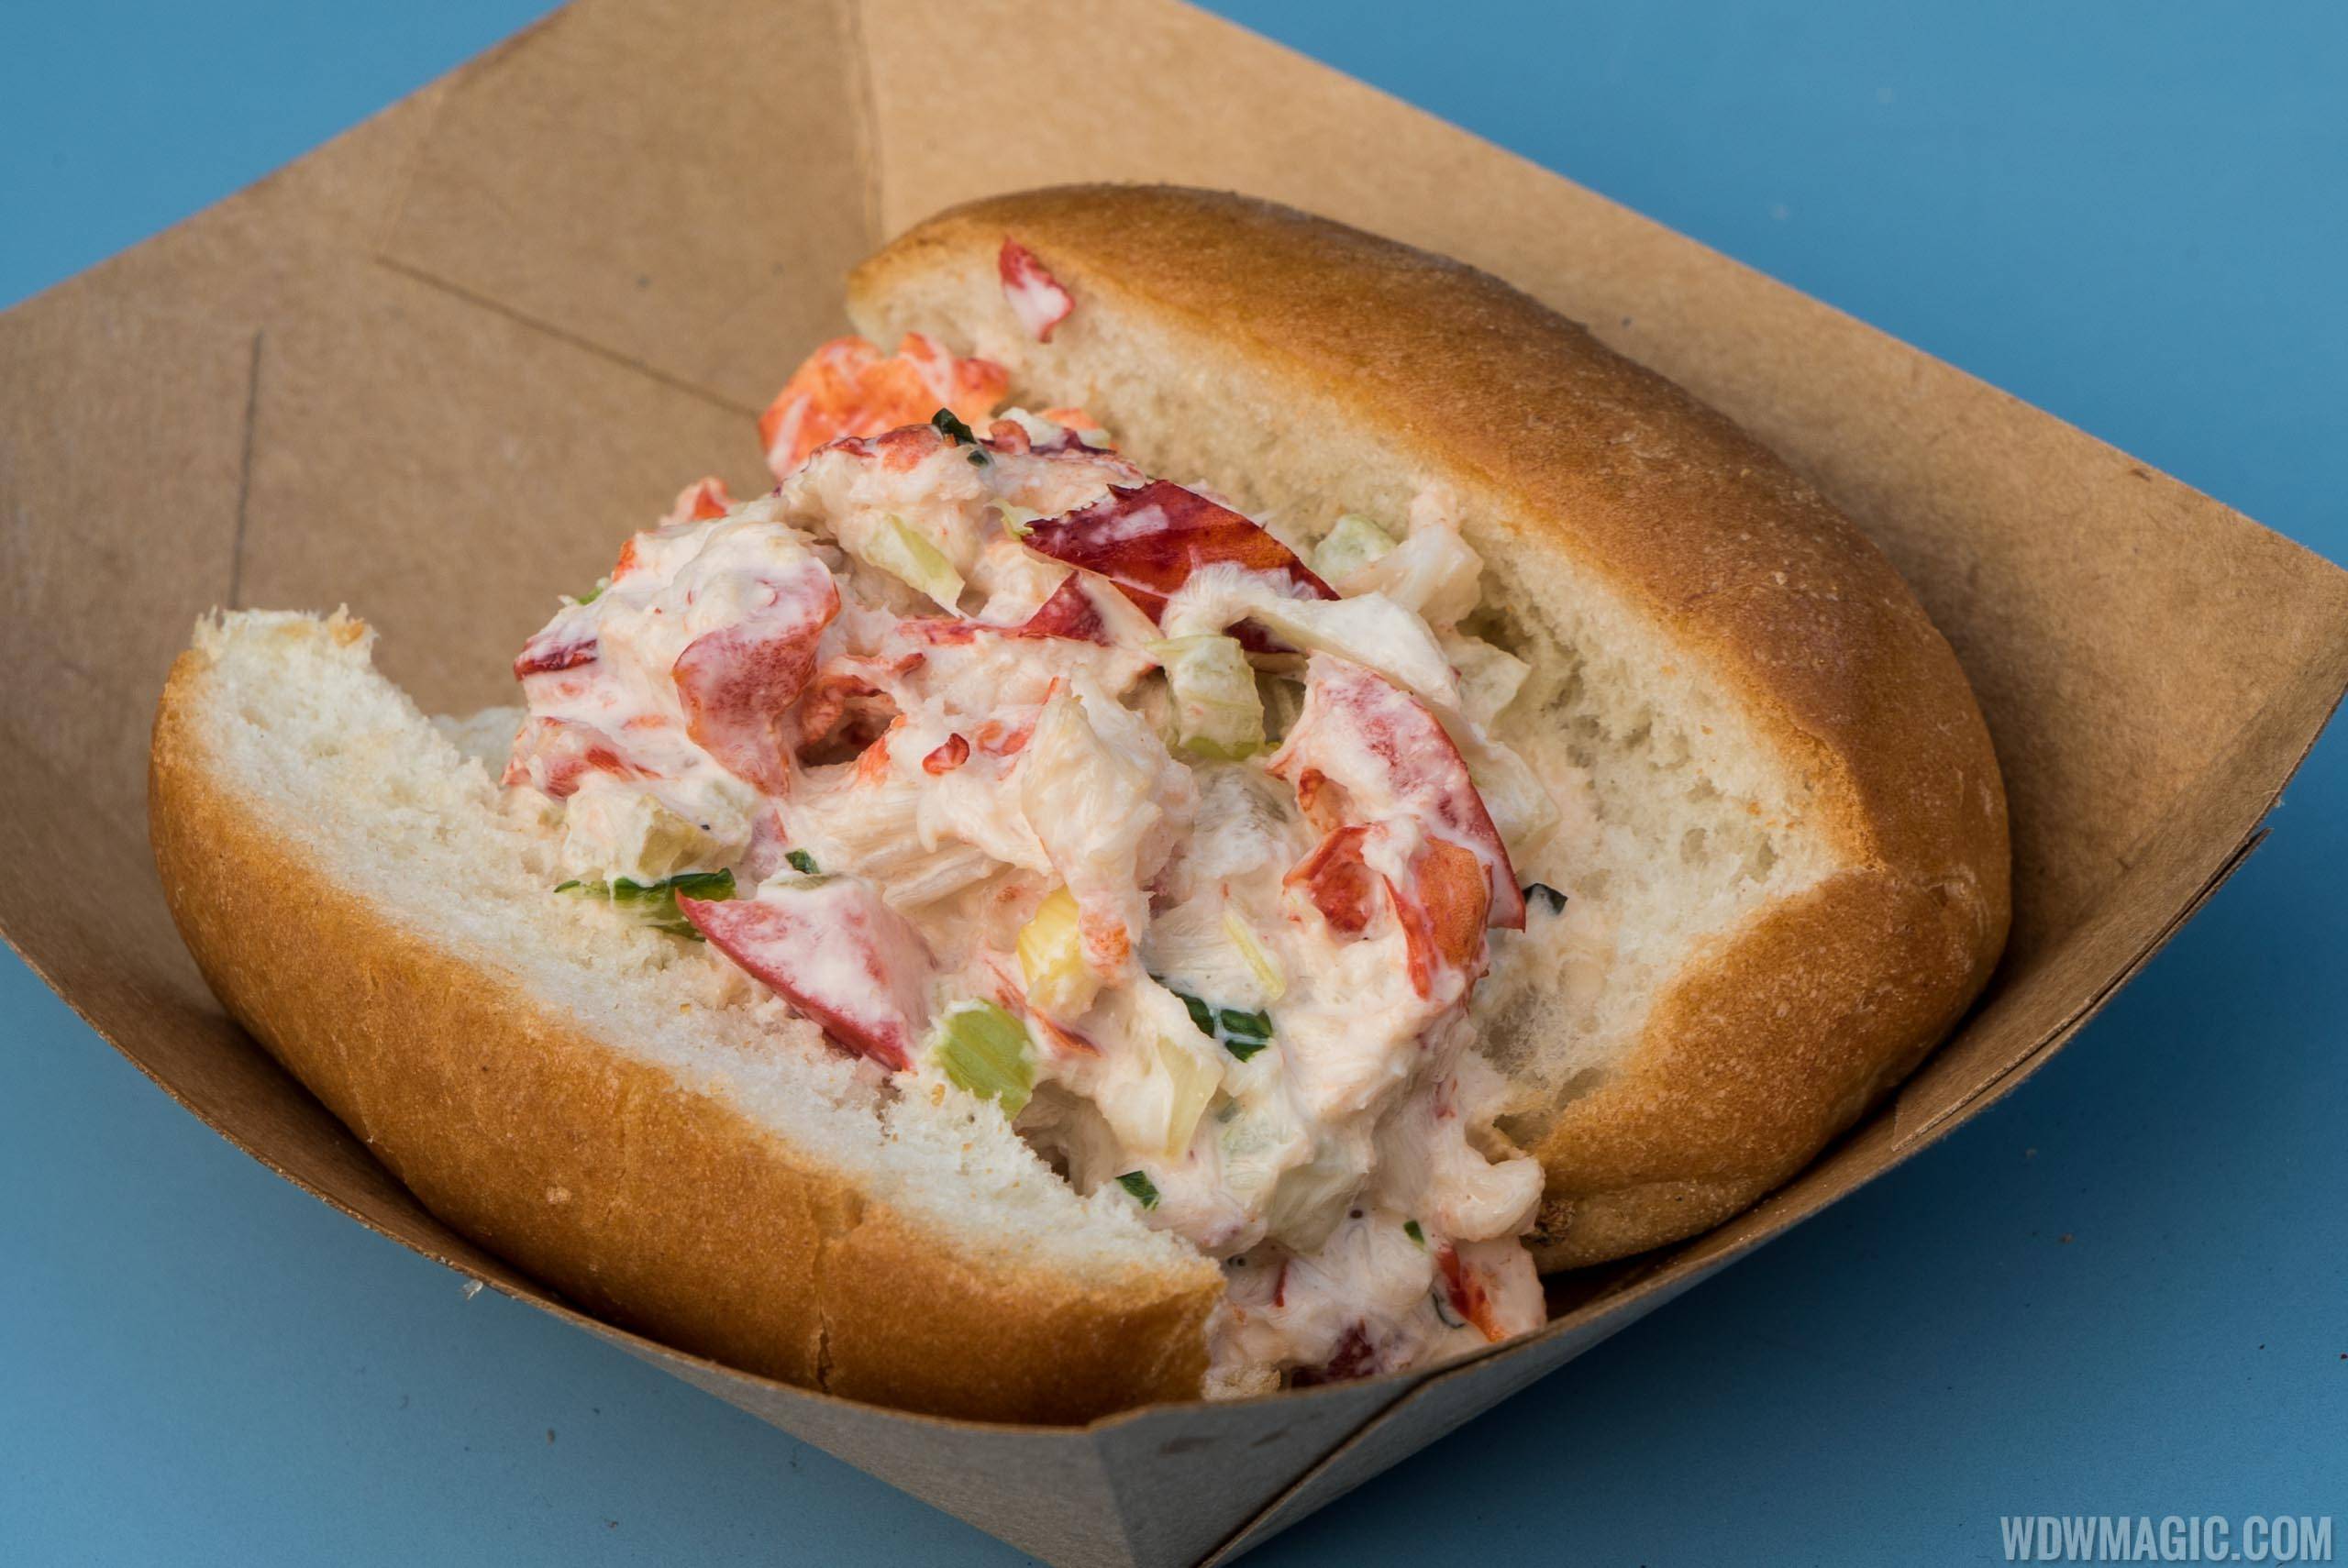 Hops and Barley - New England Lobster Roll 